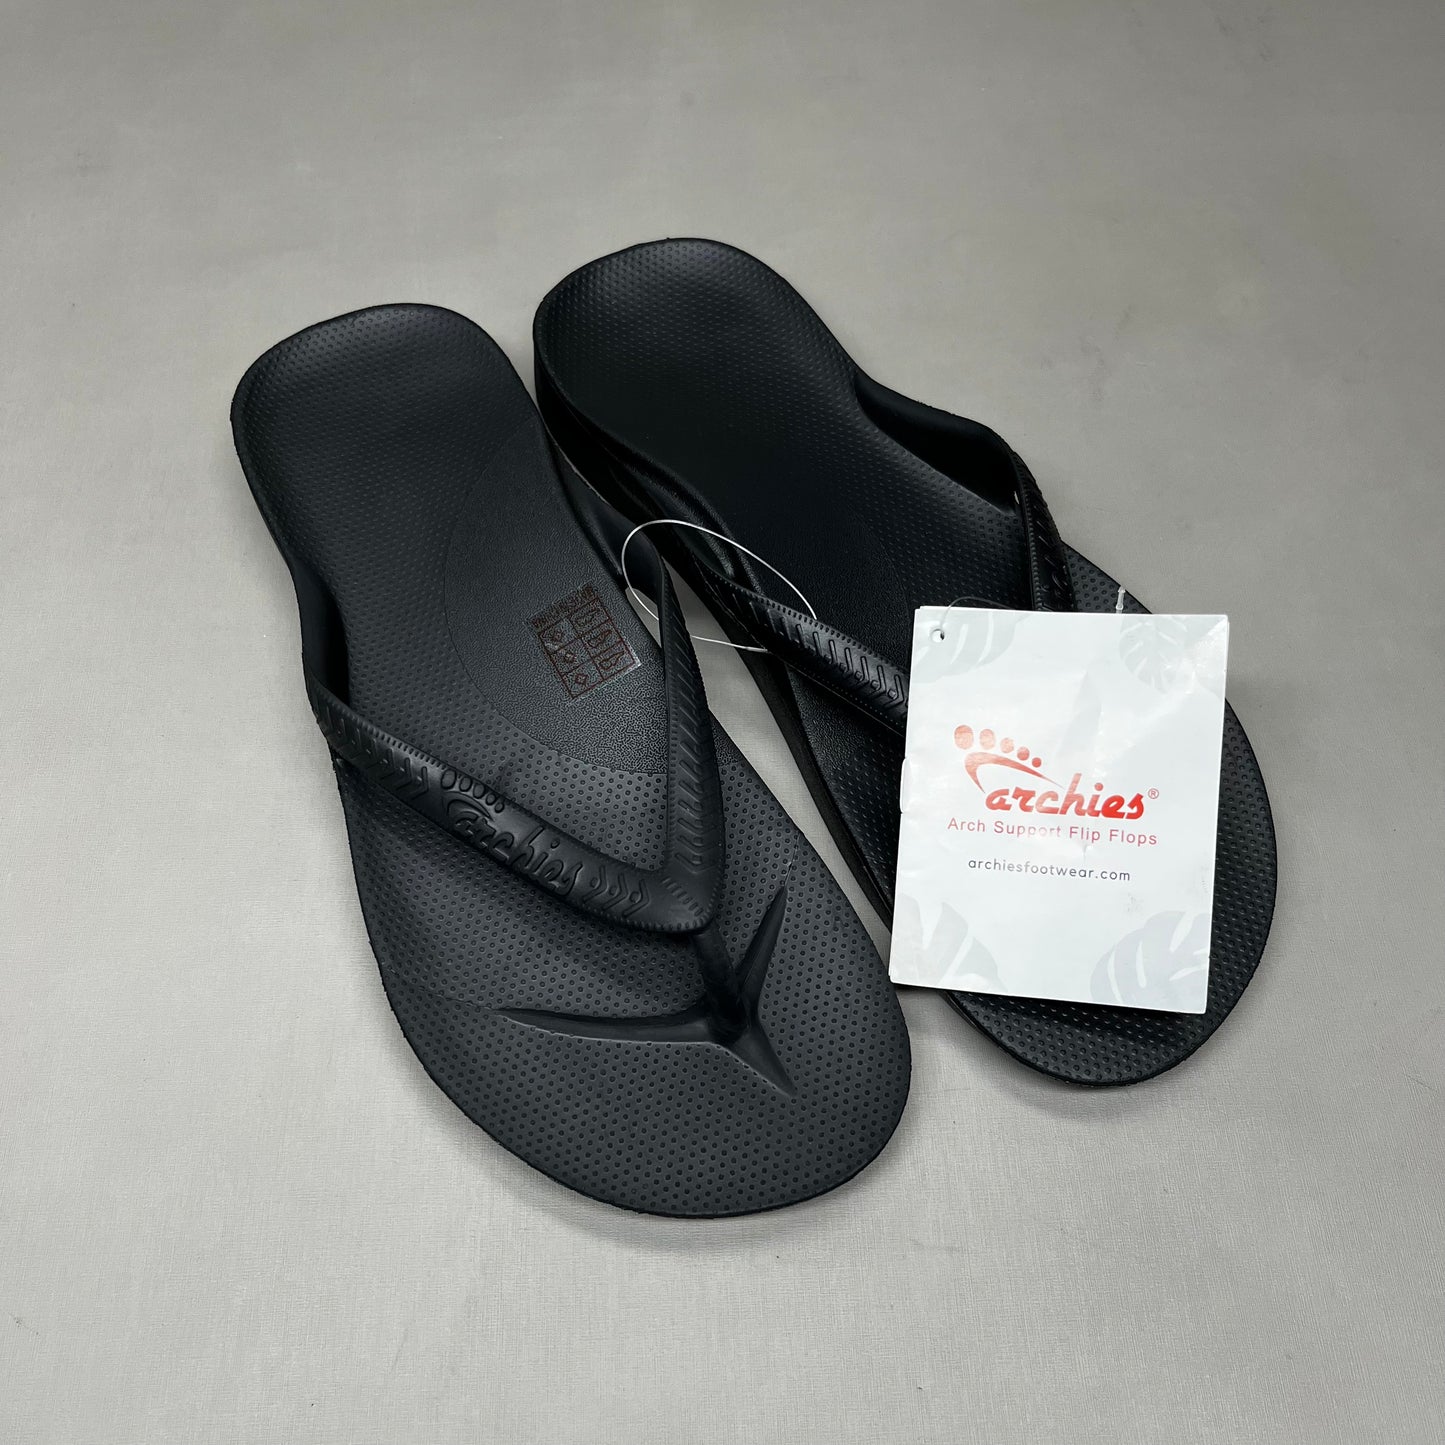 ARCHIES Arch Support Thongs HIGH SUPPORT Flip Flops Men's Sz 14 Black (New)